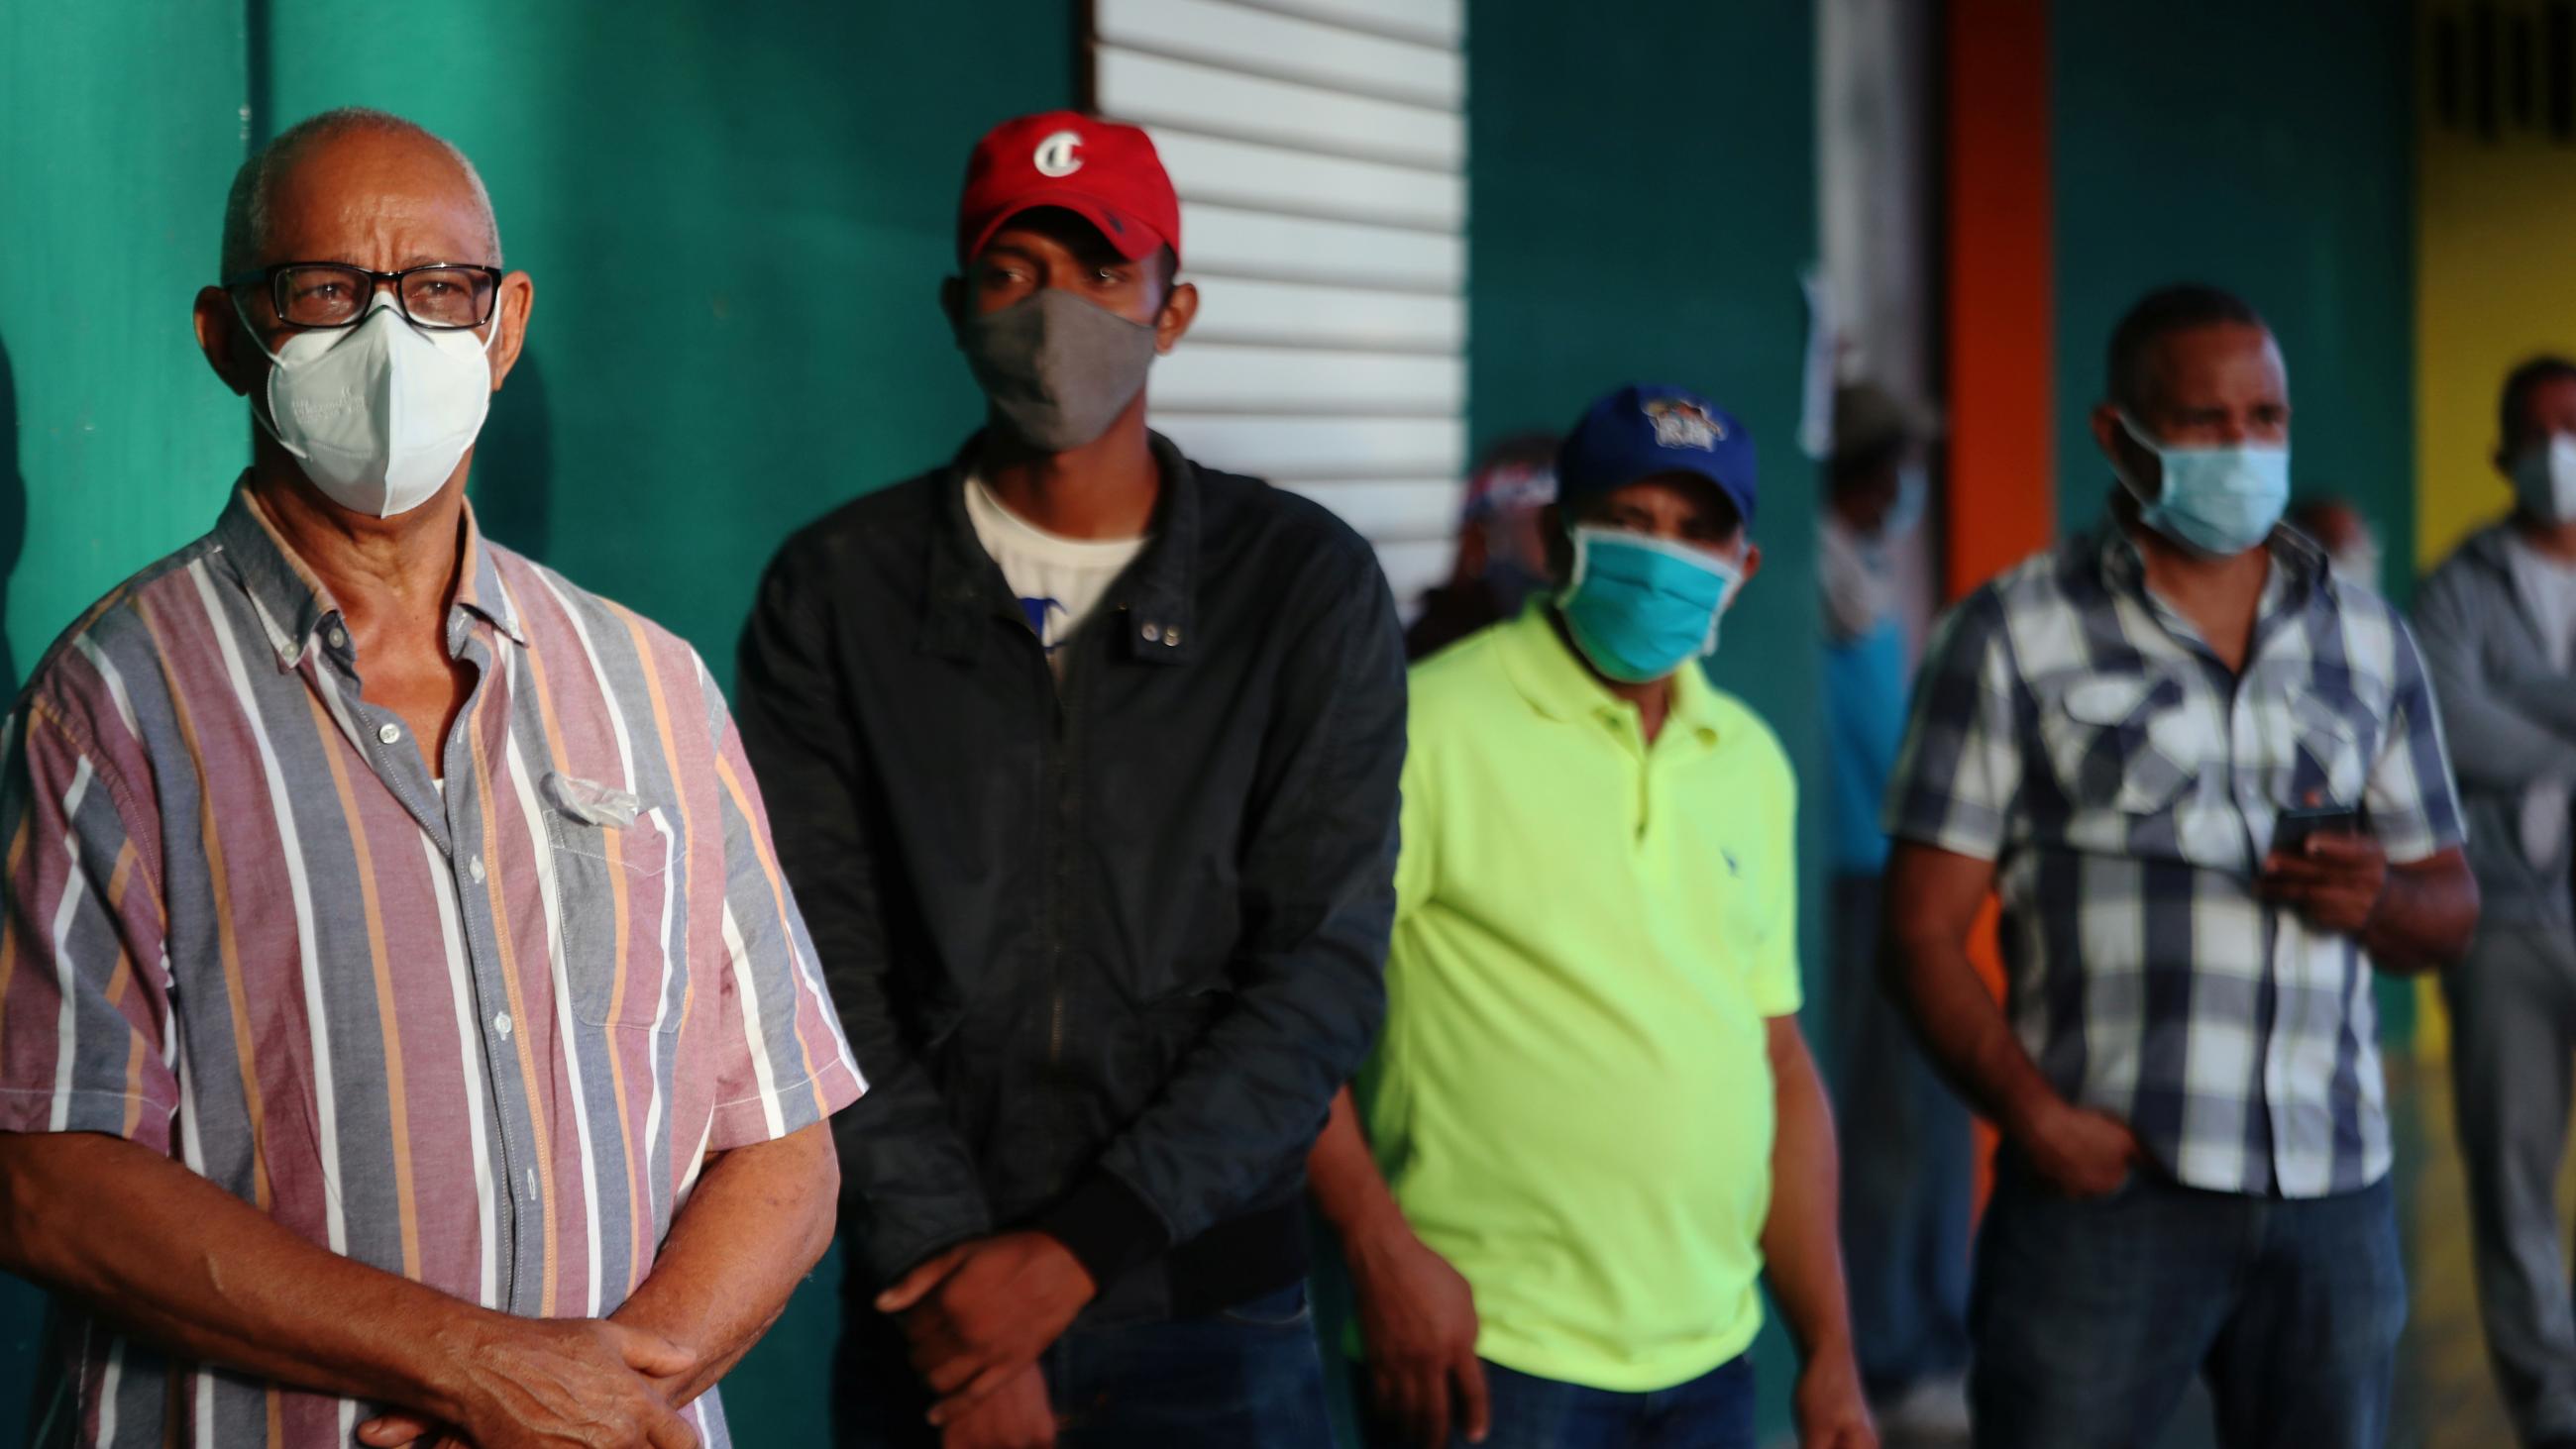 People wearing protective masks stand in line to cast their votes in the general election during the outbreak of the coronavirus disease (COVID-19), in Santiago, Dominican Republic July 5, 2020.